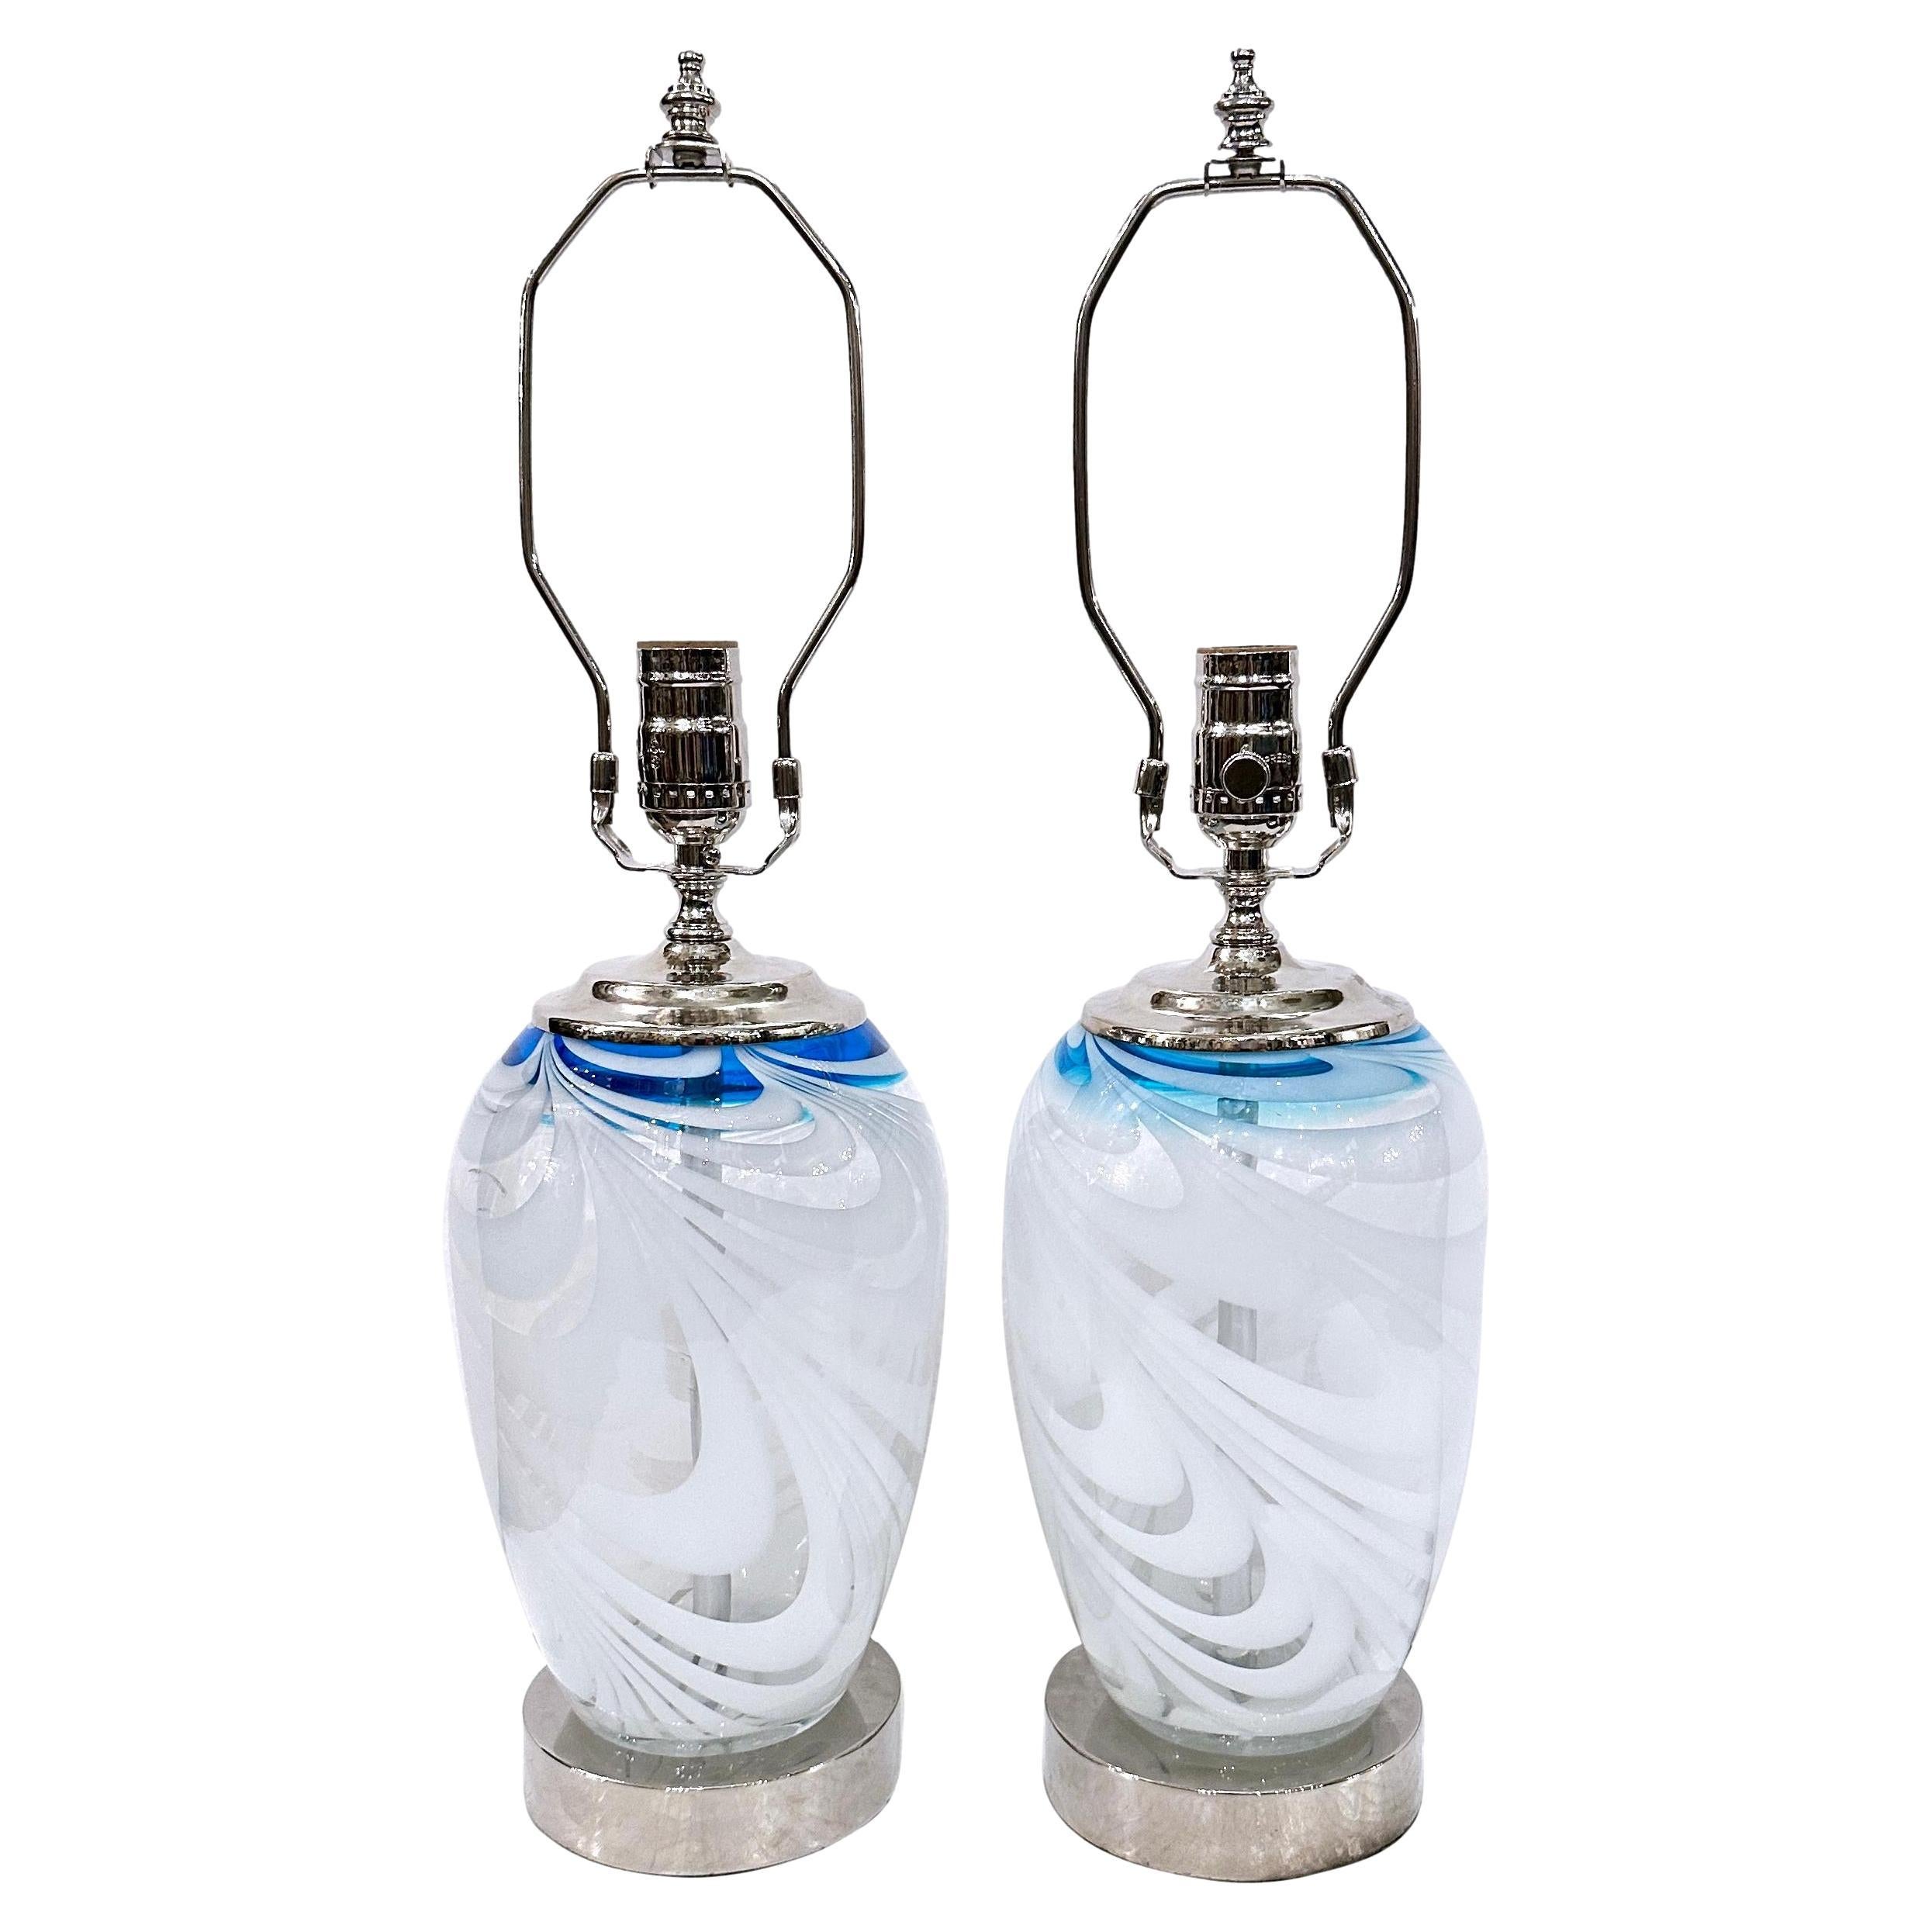 Pair of Midcentury Murano Lamps For Sale